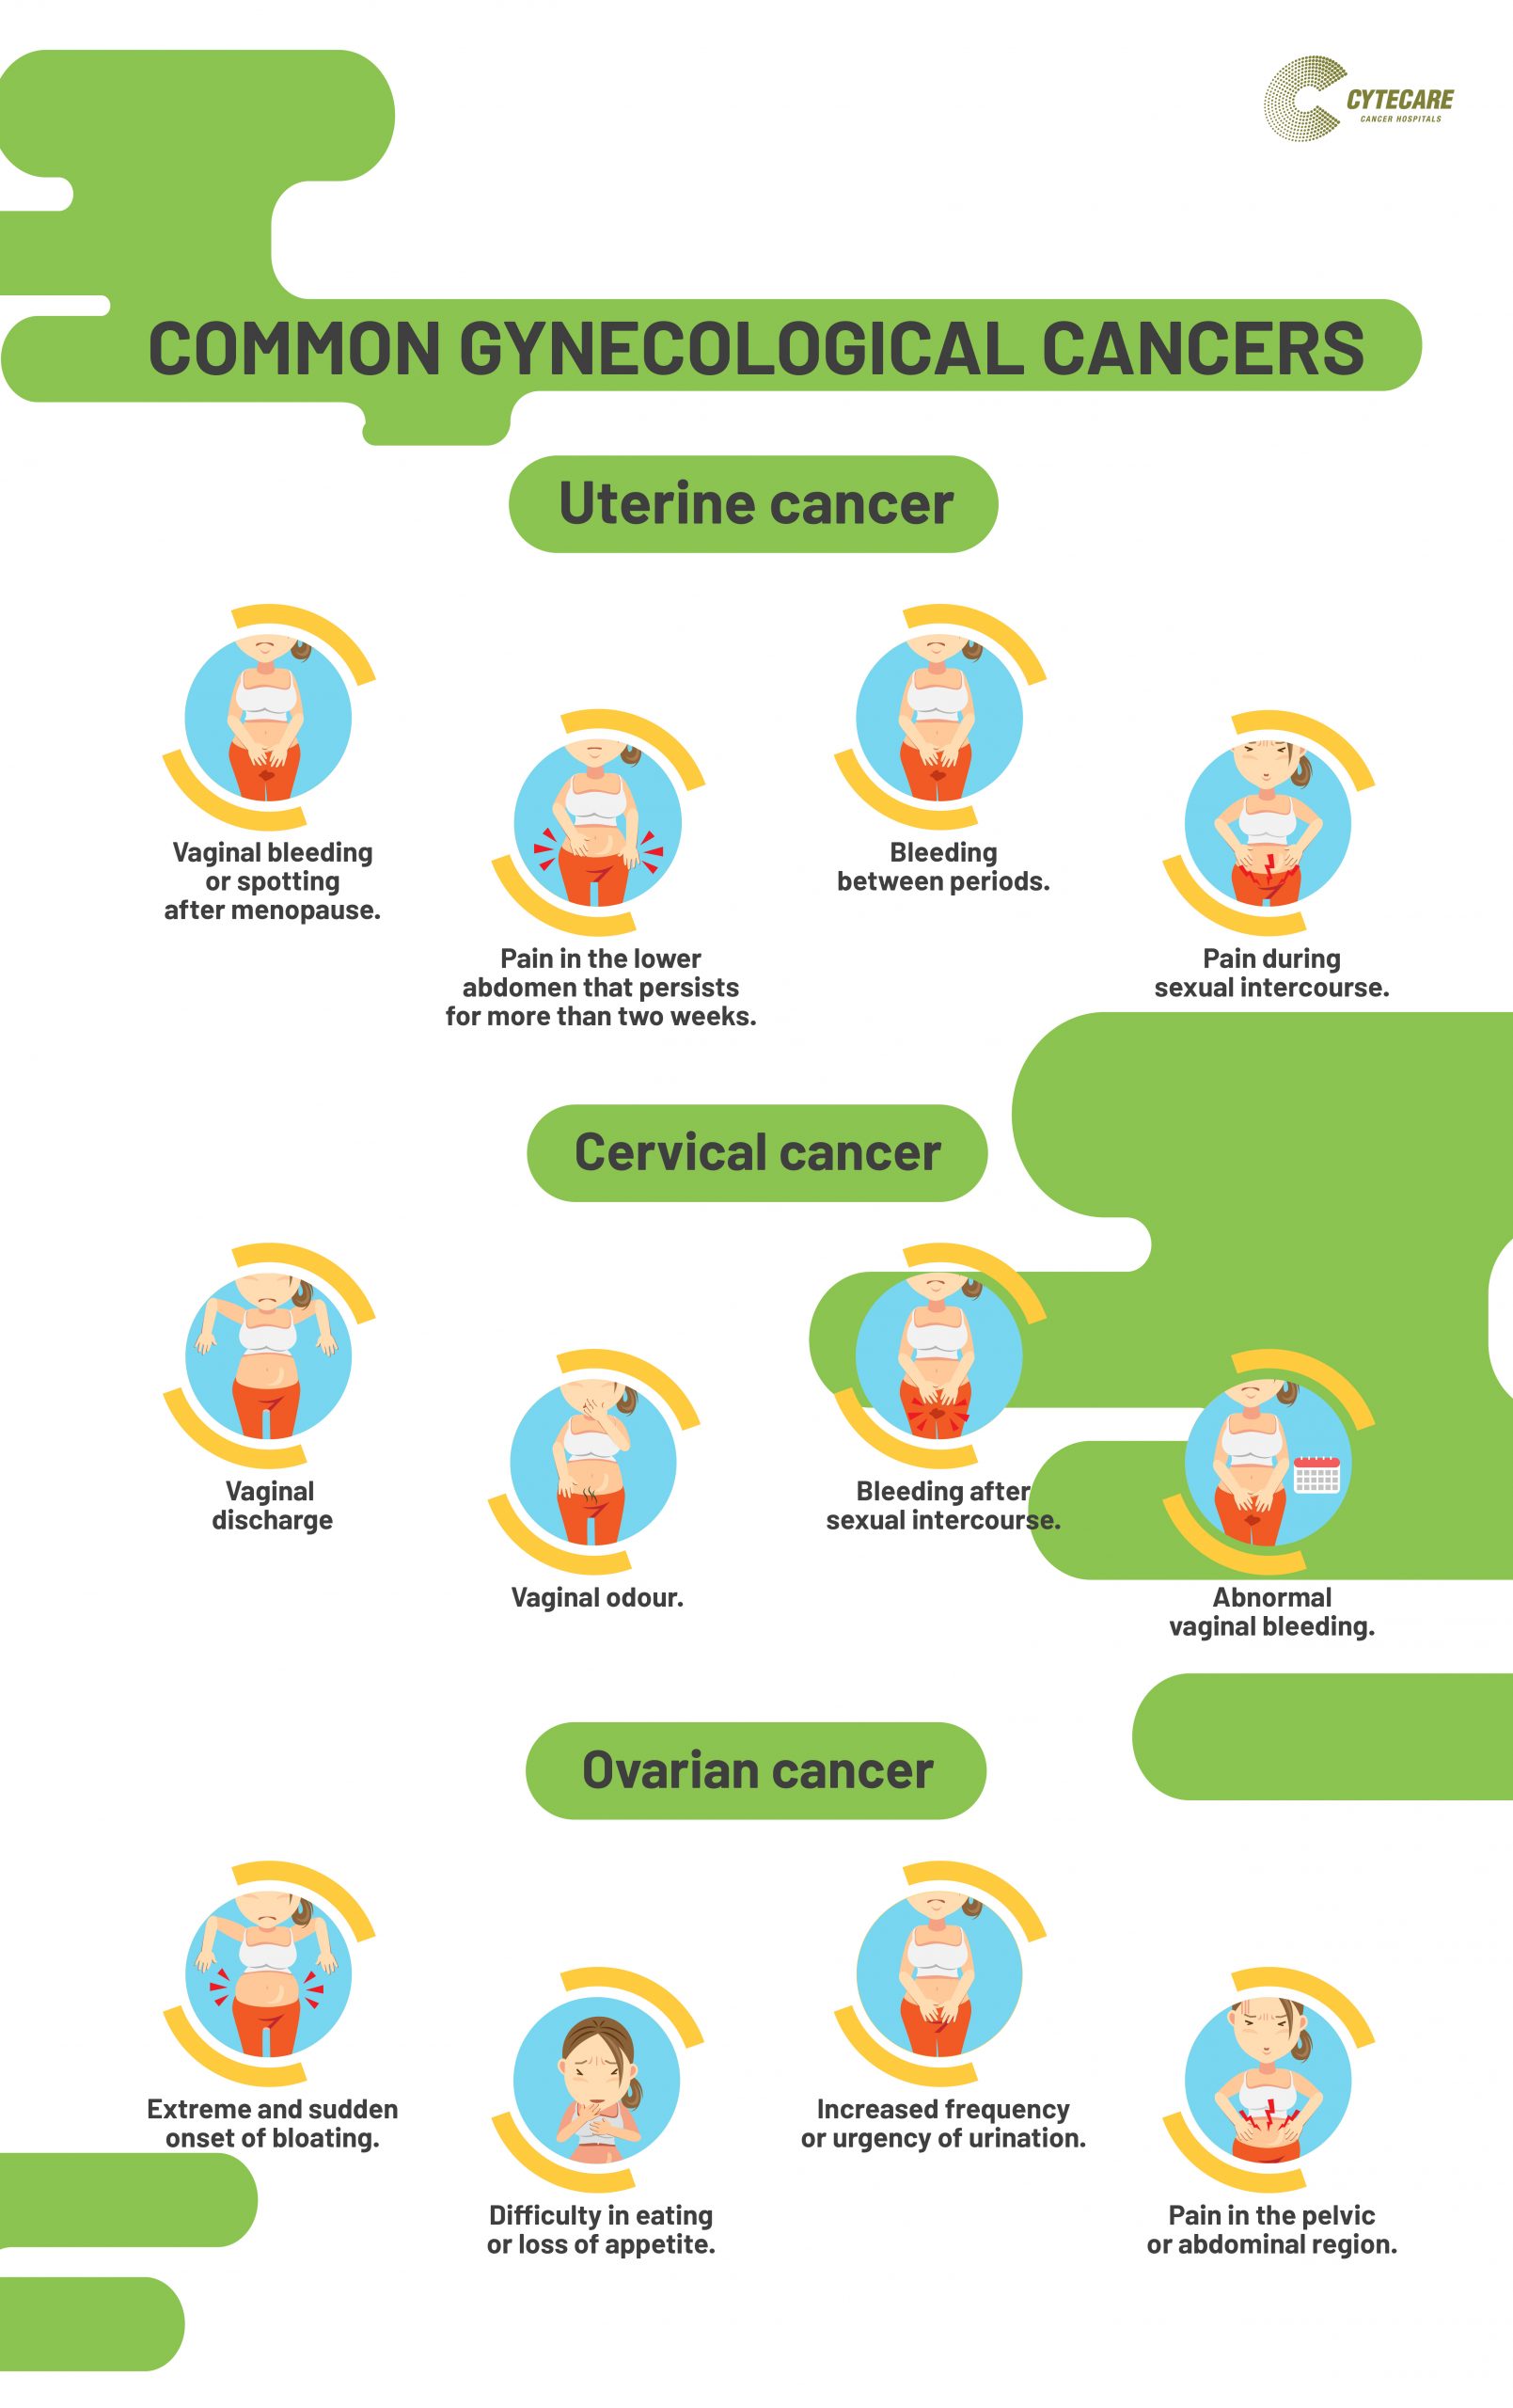 Gynecological cancers